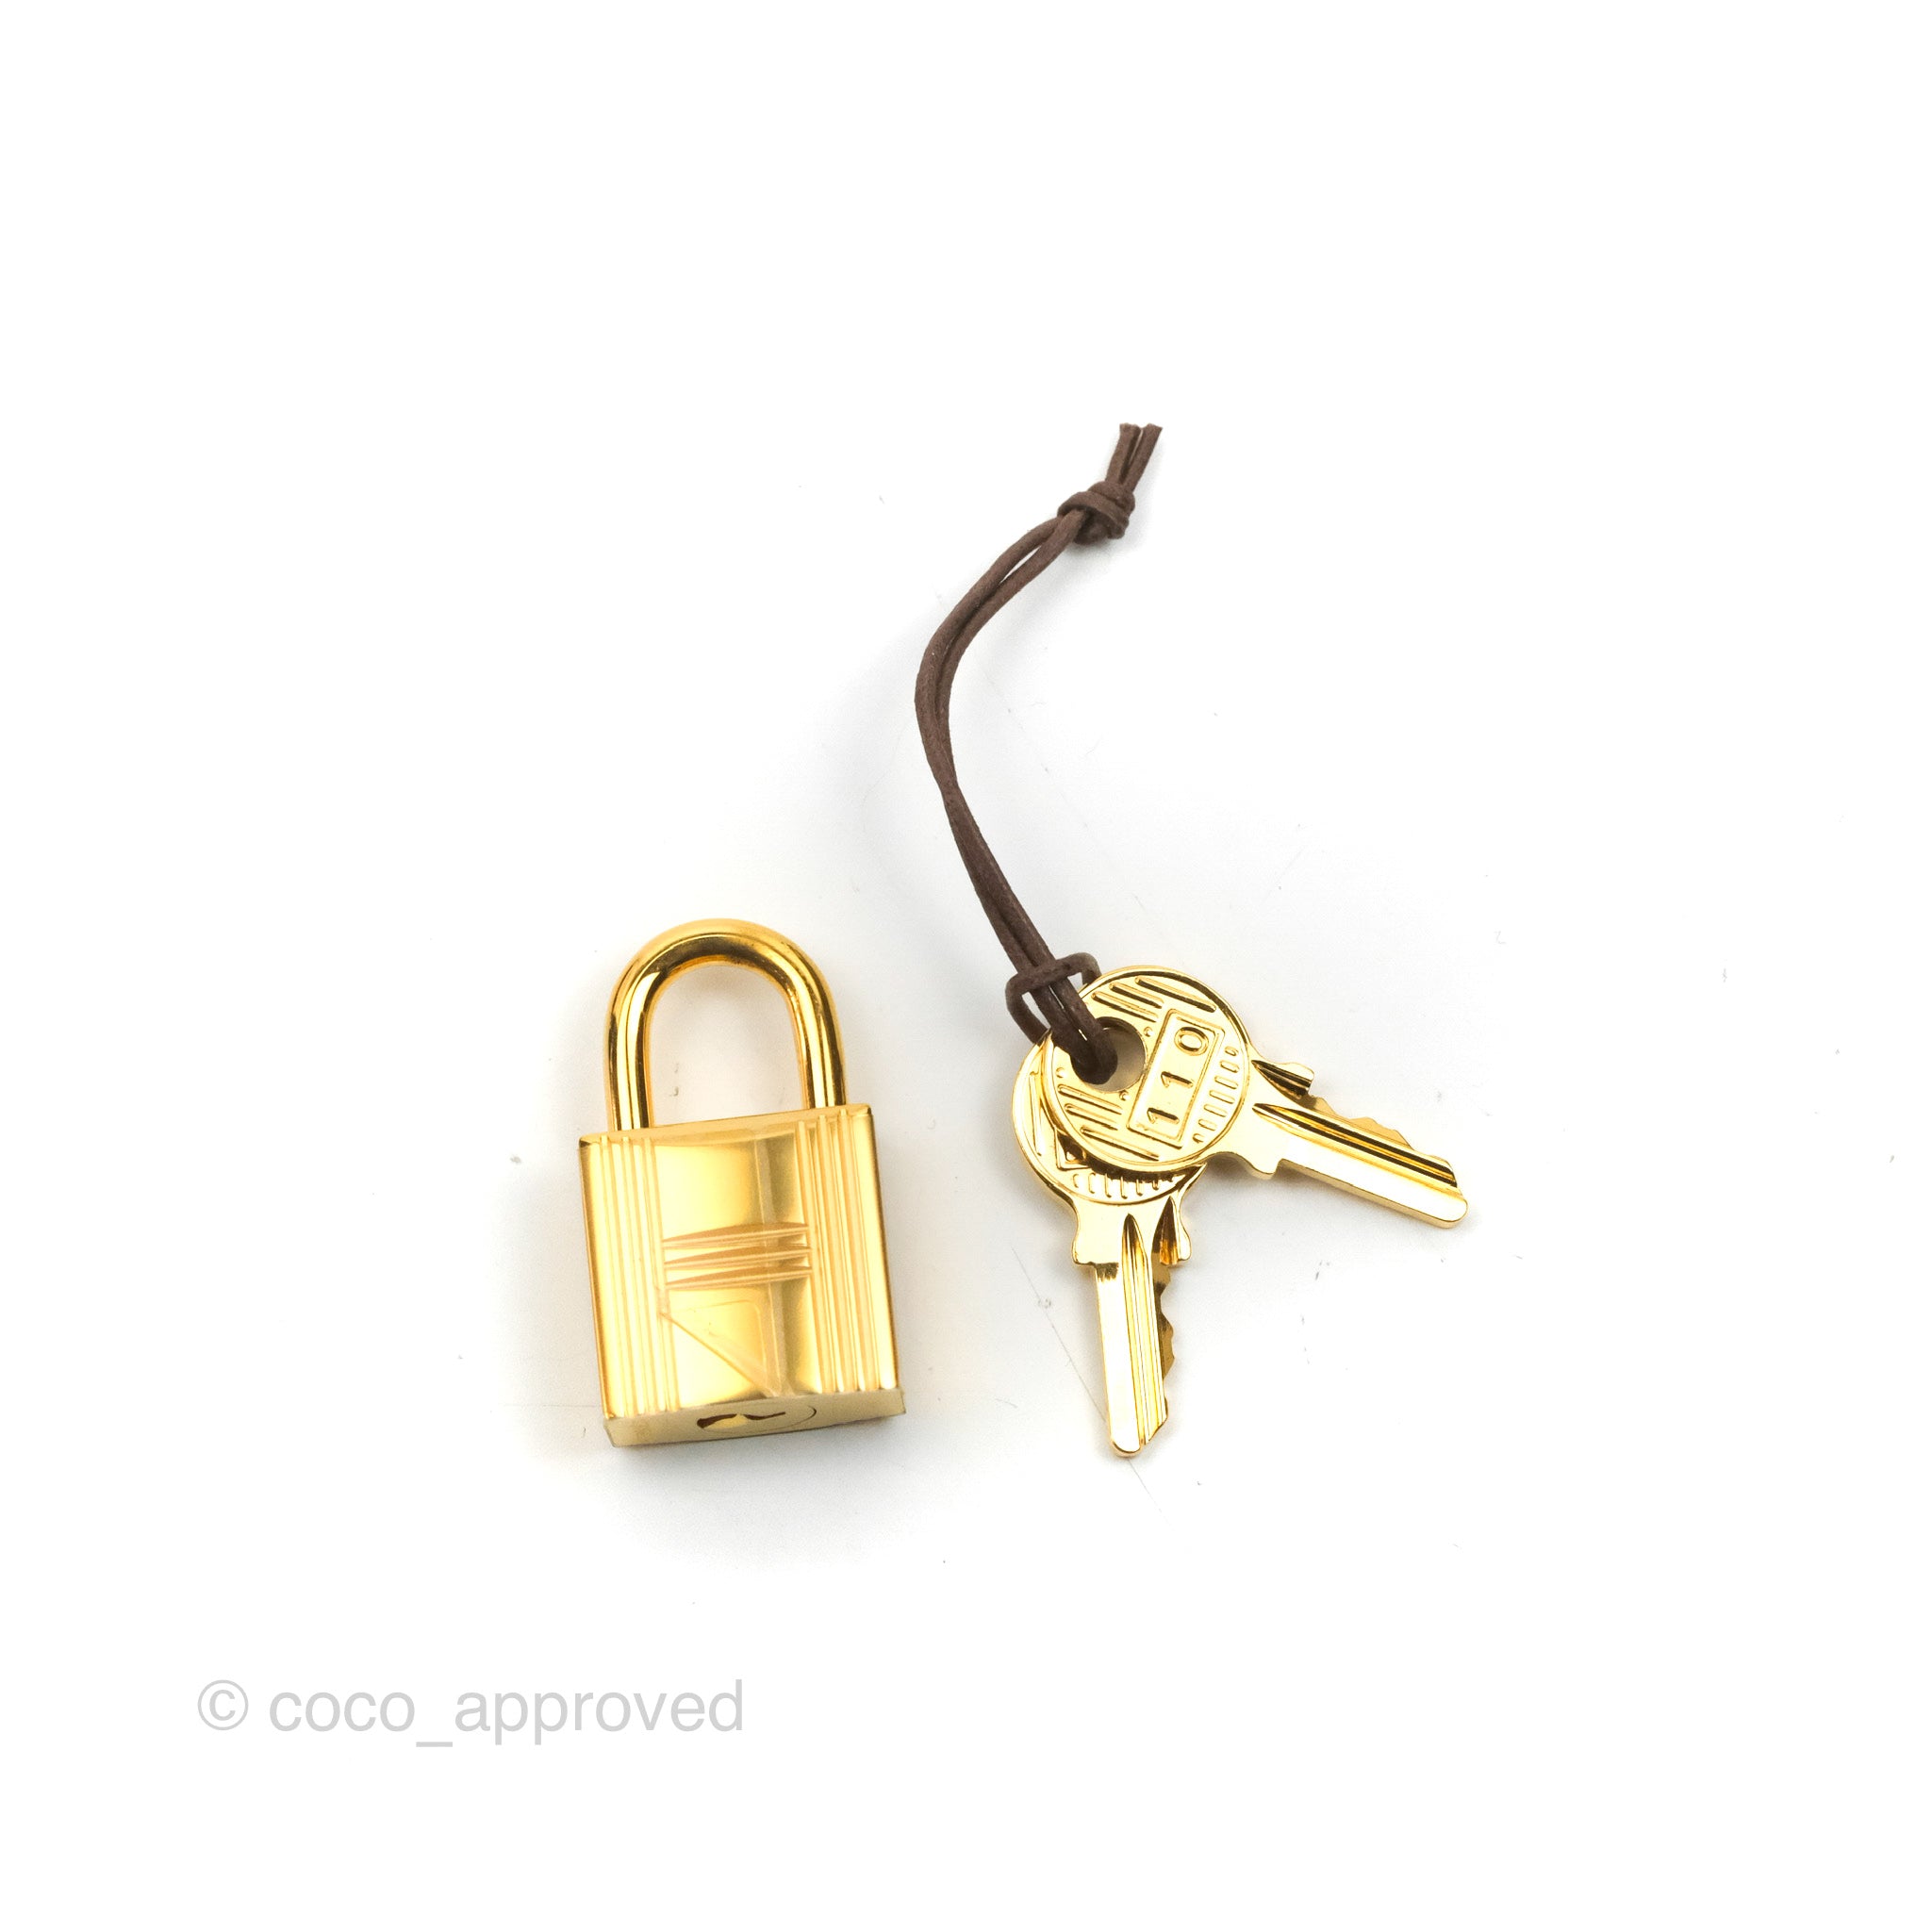 LoVey Goody - 🤩New Hermes Picotin Lock 22 Etoupe Clemence in Gold Hardware  Comes full set with receipt! WhatsApp us at +60123288255 for more info  #hermespicotin22 #hermespicotinlock22 #picotinlock22 #picotin22  #picotin22etoupe #picotin22etou